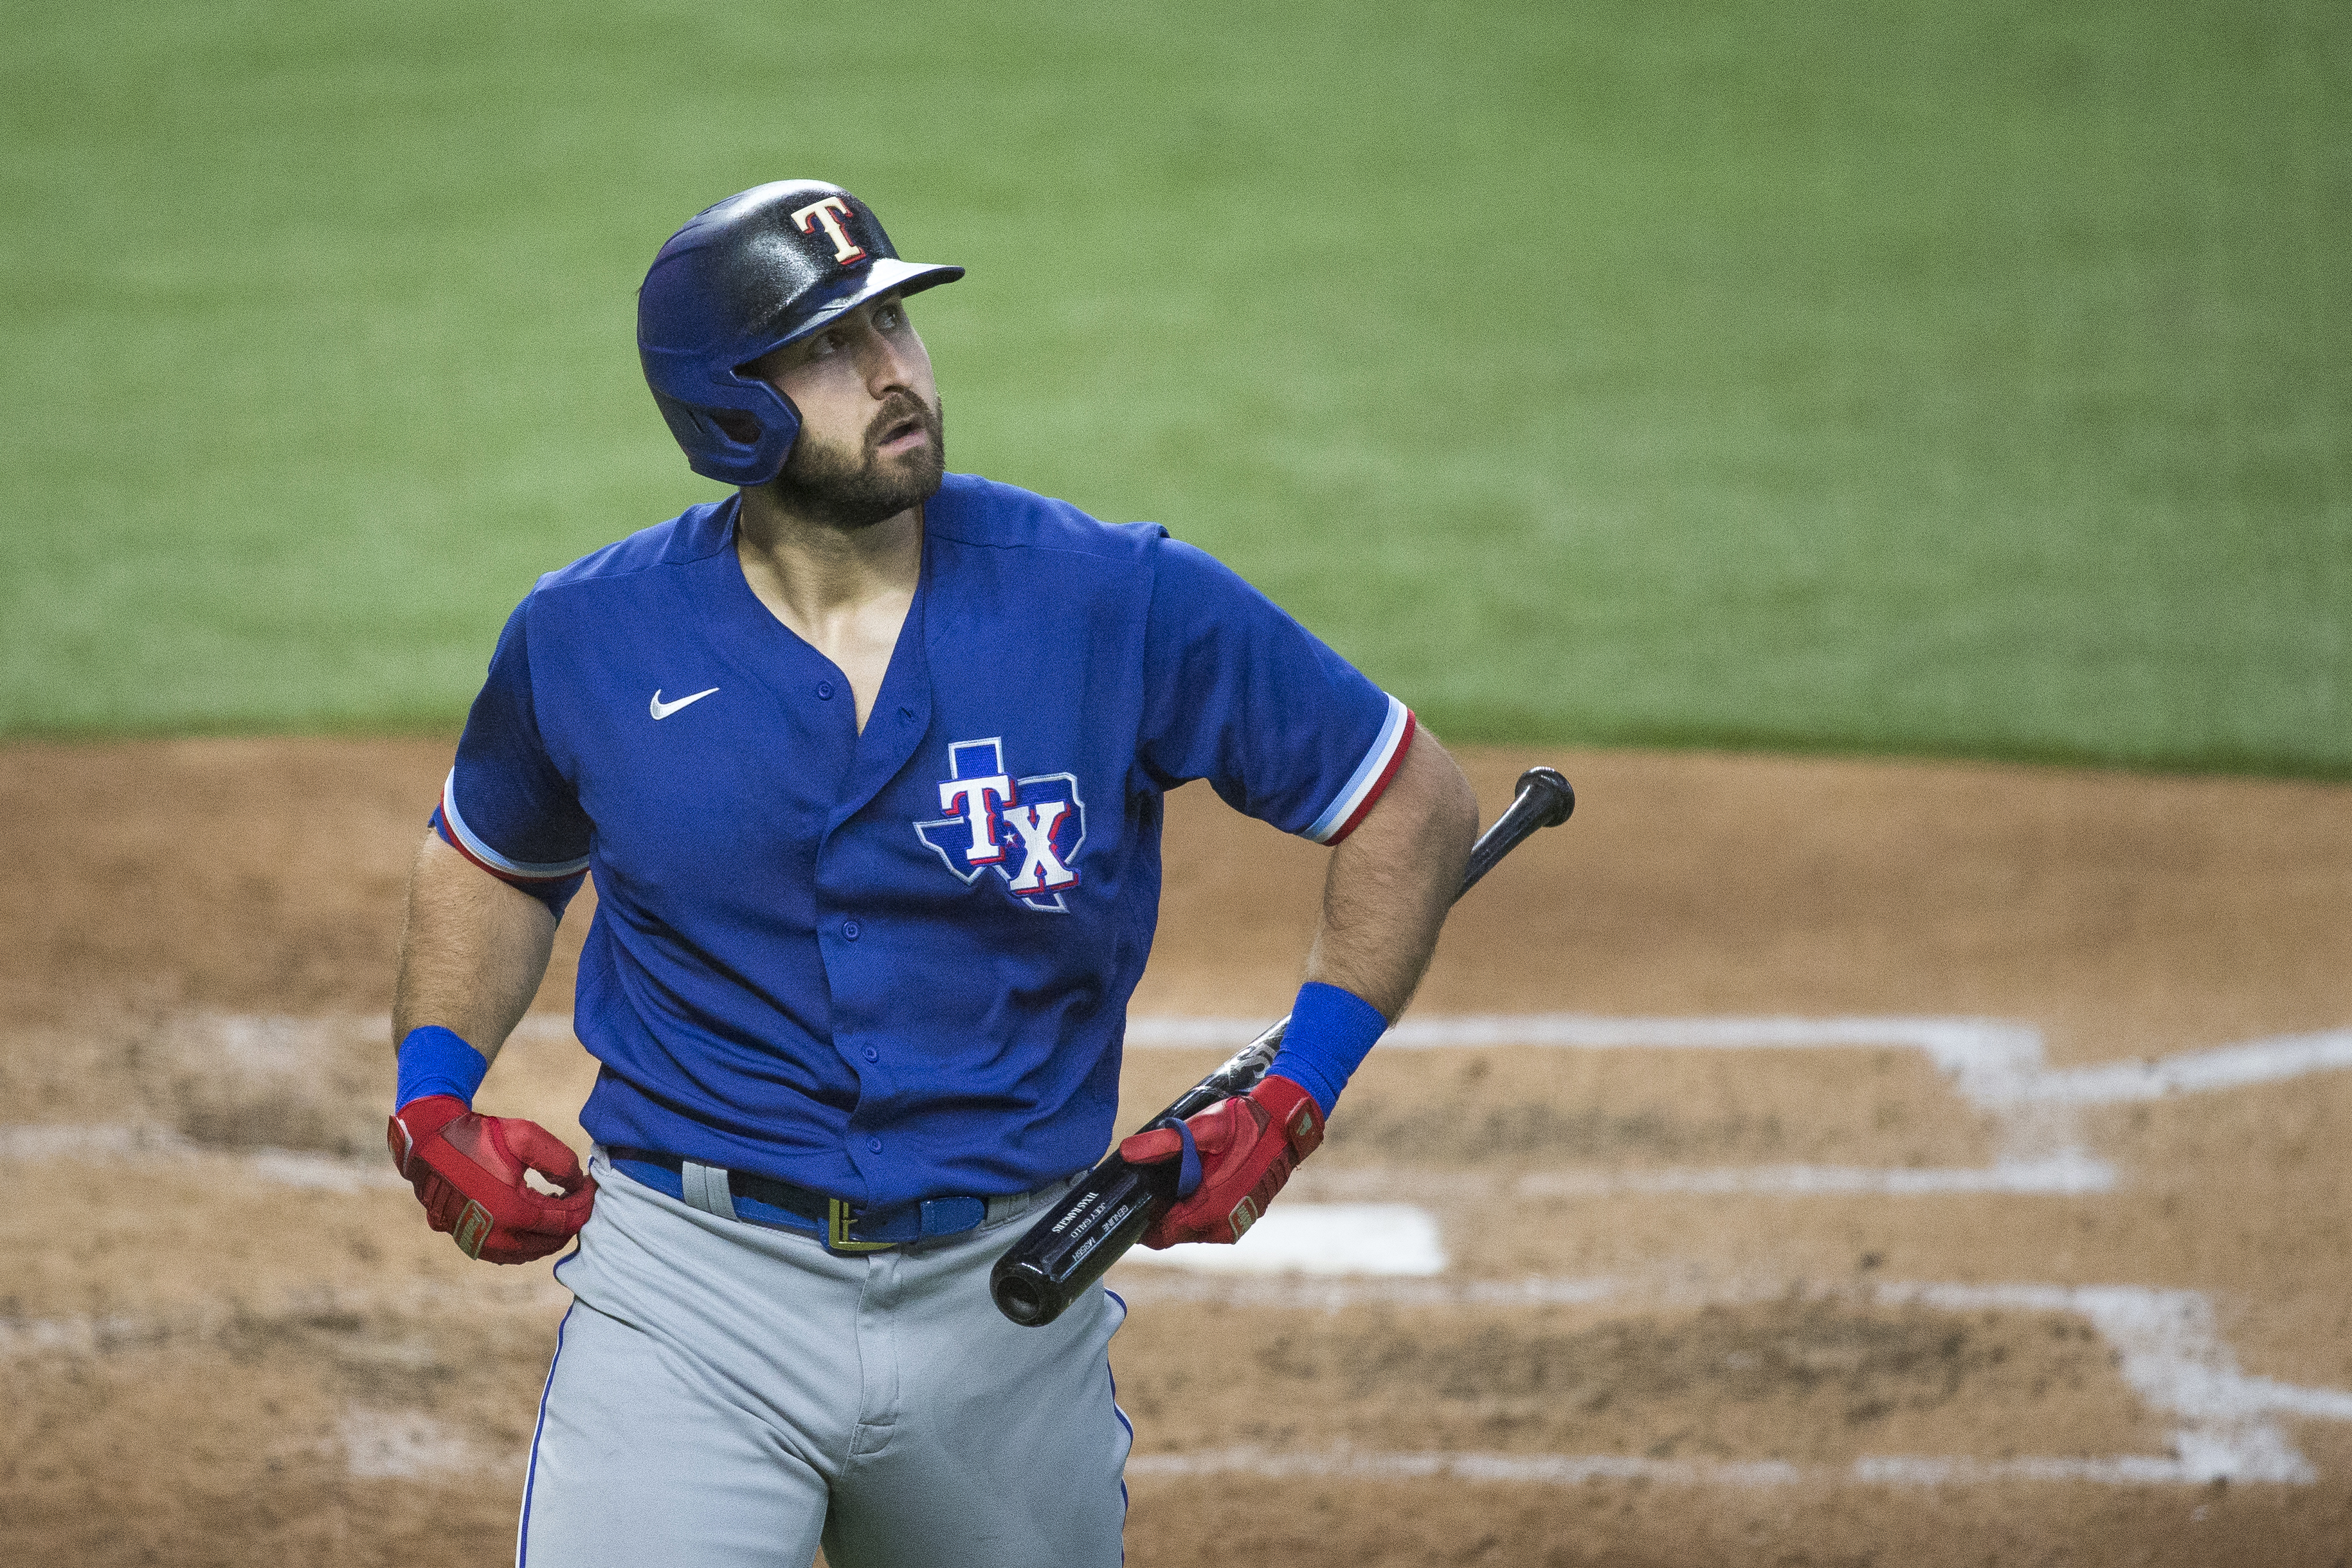 This is a 2021 photo of Joey Gallo of the Texas Rangers baseball